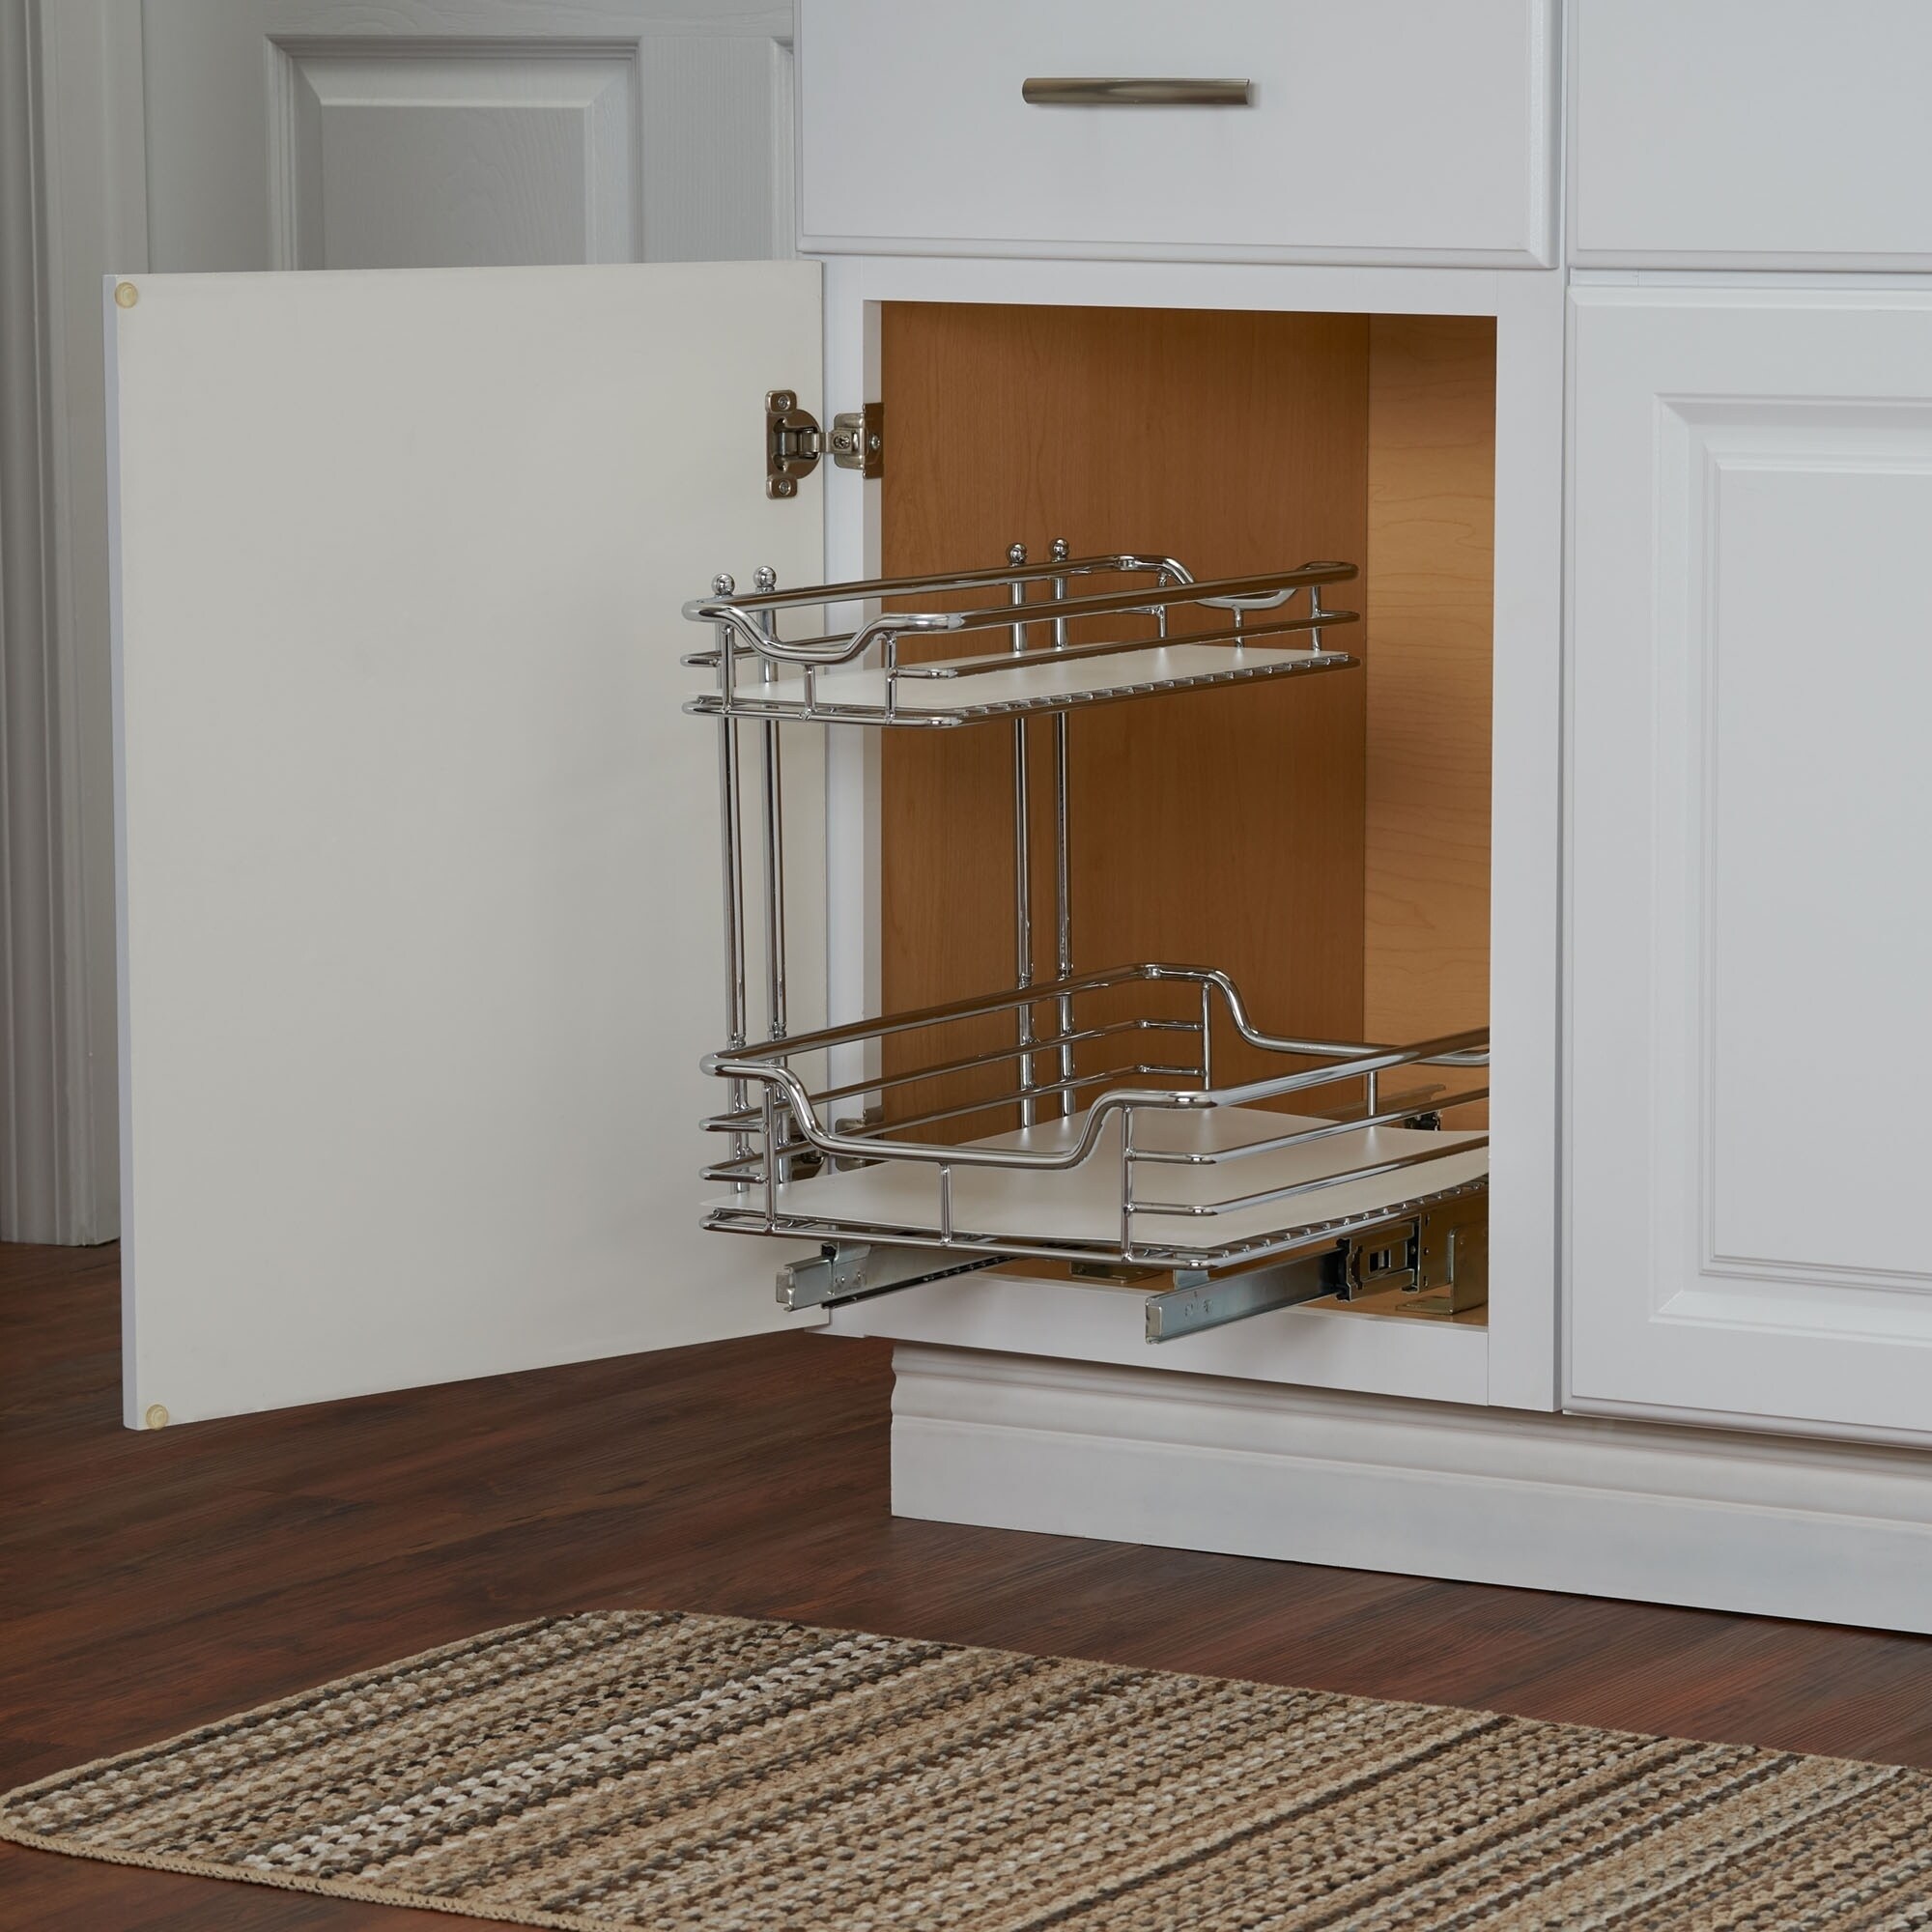 https://ak1.ostkcdn.com/images/products/17520665/Standard-2-Tier-12.5-inch-Glidez-Sliding-Under-Sink-Organizer-Chrome-and-White-Liner-b09f8263-7d53-41b2-8119-3bc6a56ad95a.jpg